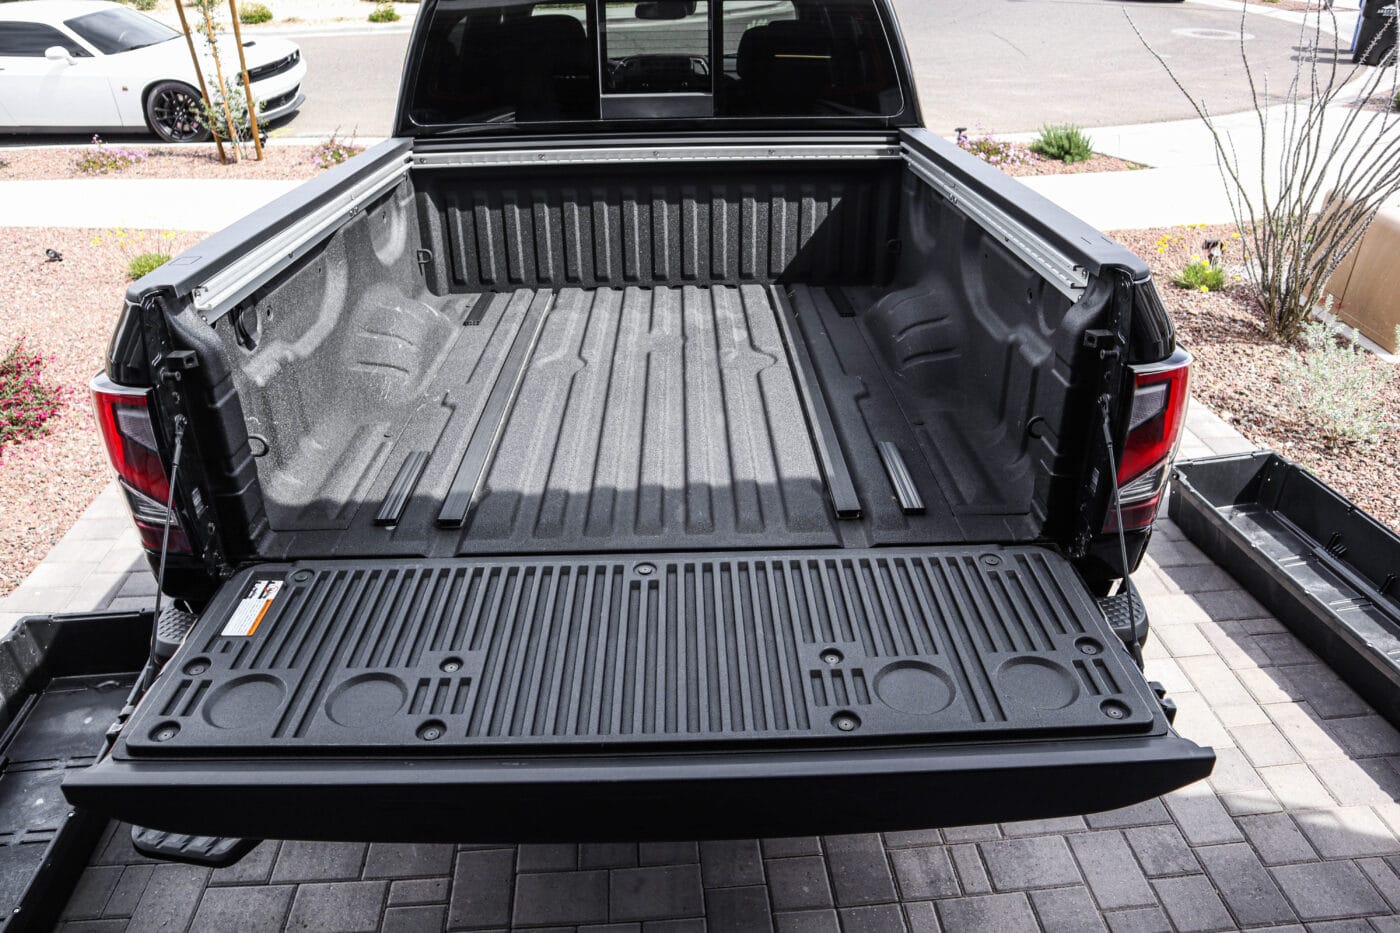 Starting installation of Decked drawer system with an empty truck bed